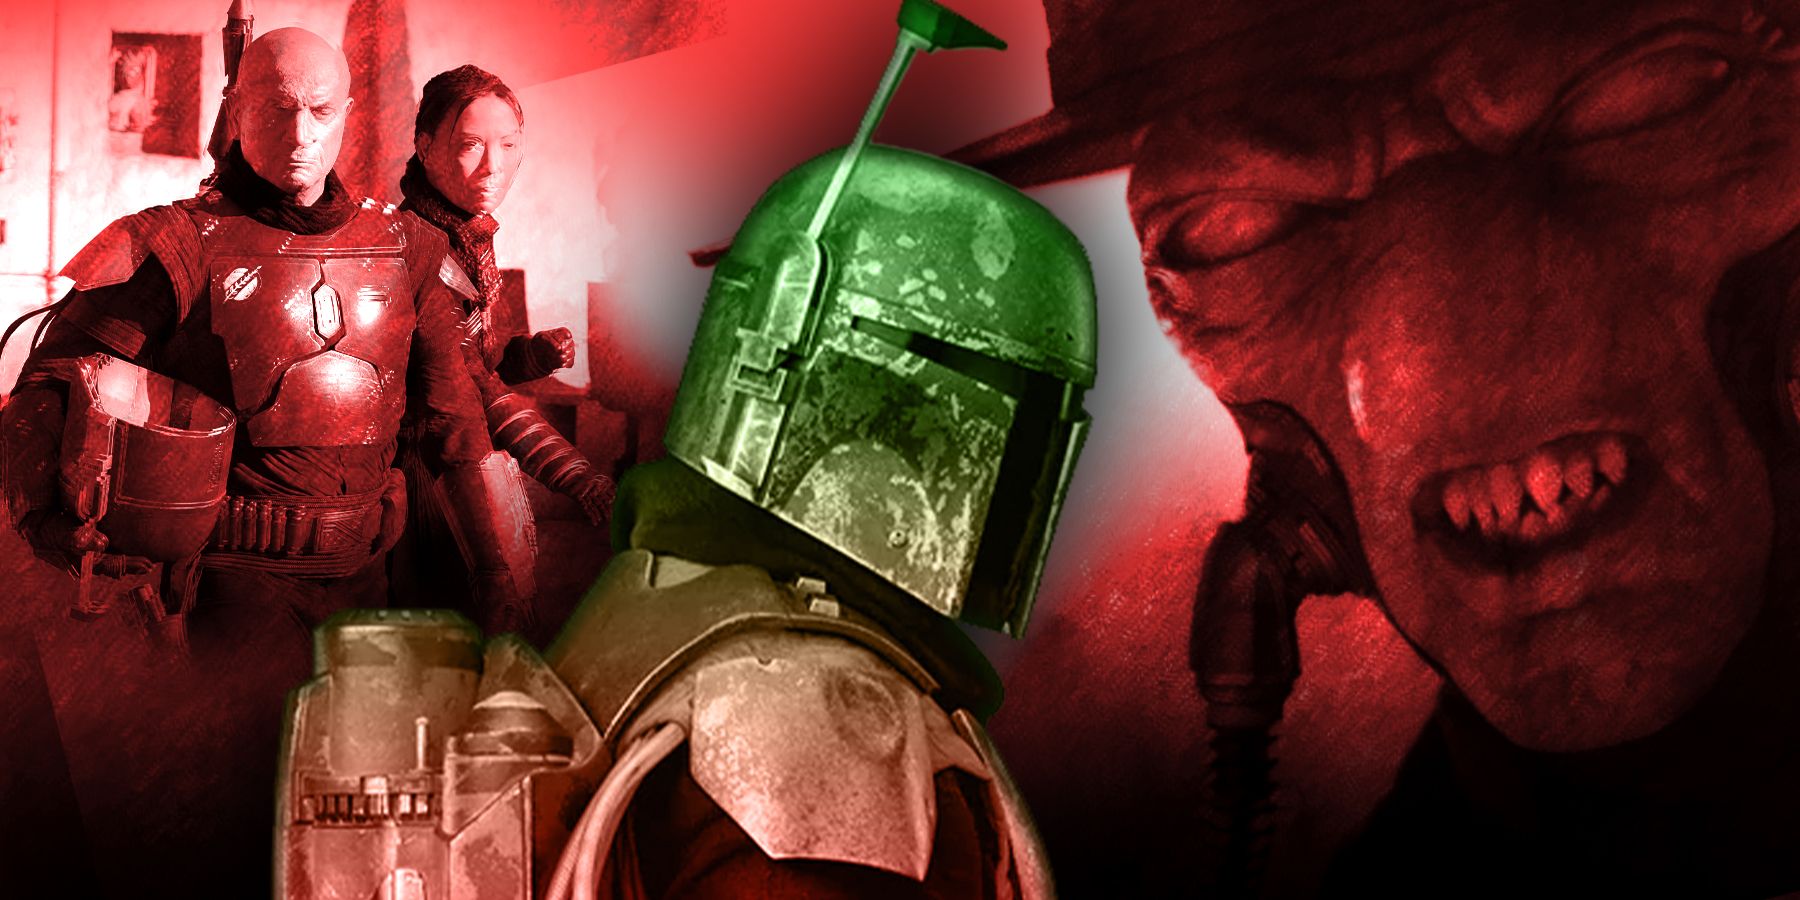  Fennec Shand and Boba Fett with his helmet off, Boba Fett with helmet on and Cad Bane of show The Book of Boba Fett